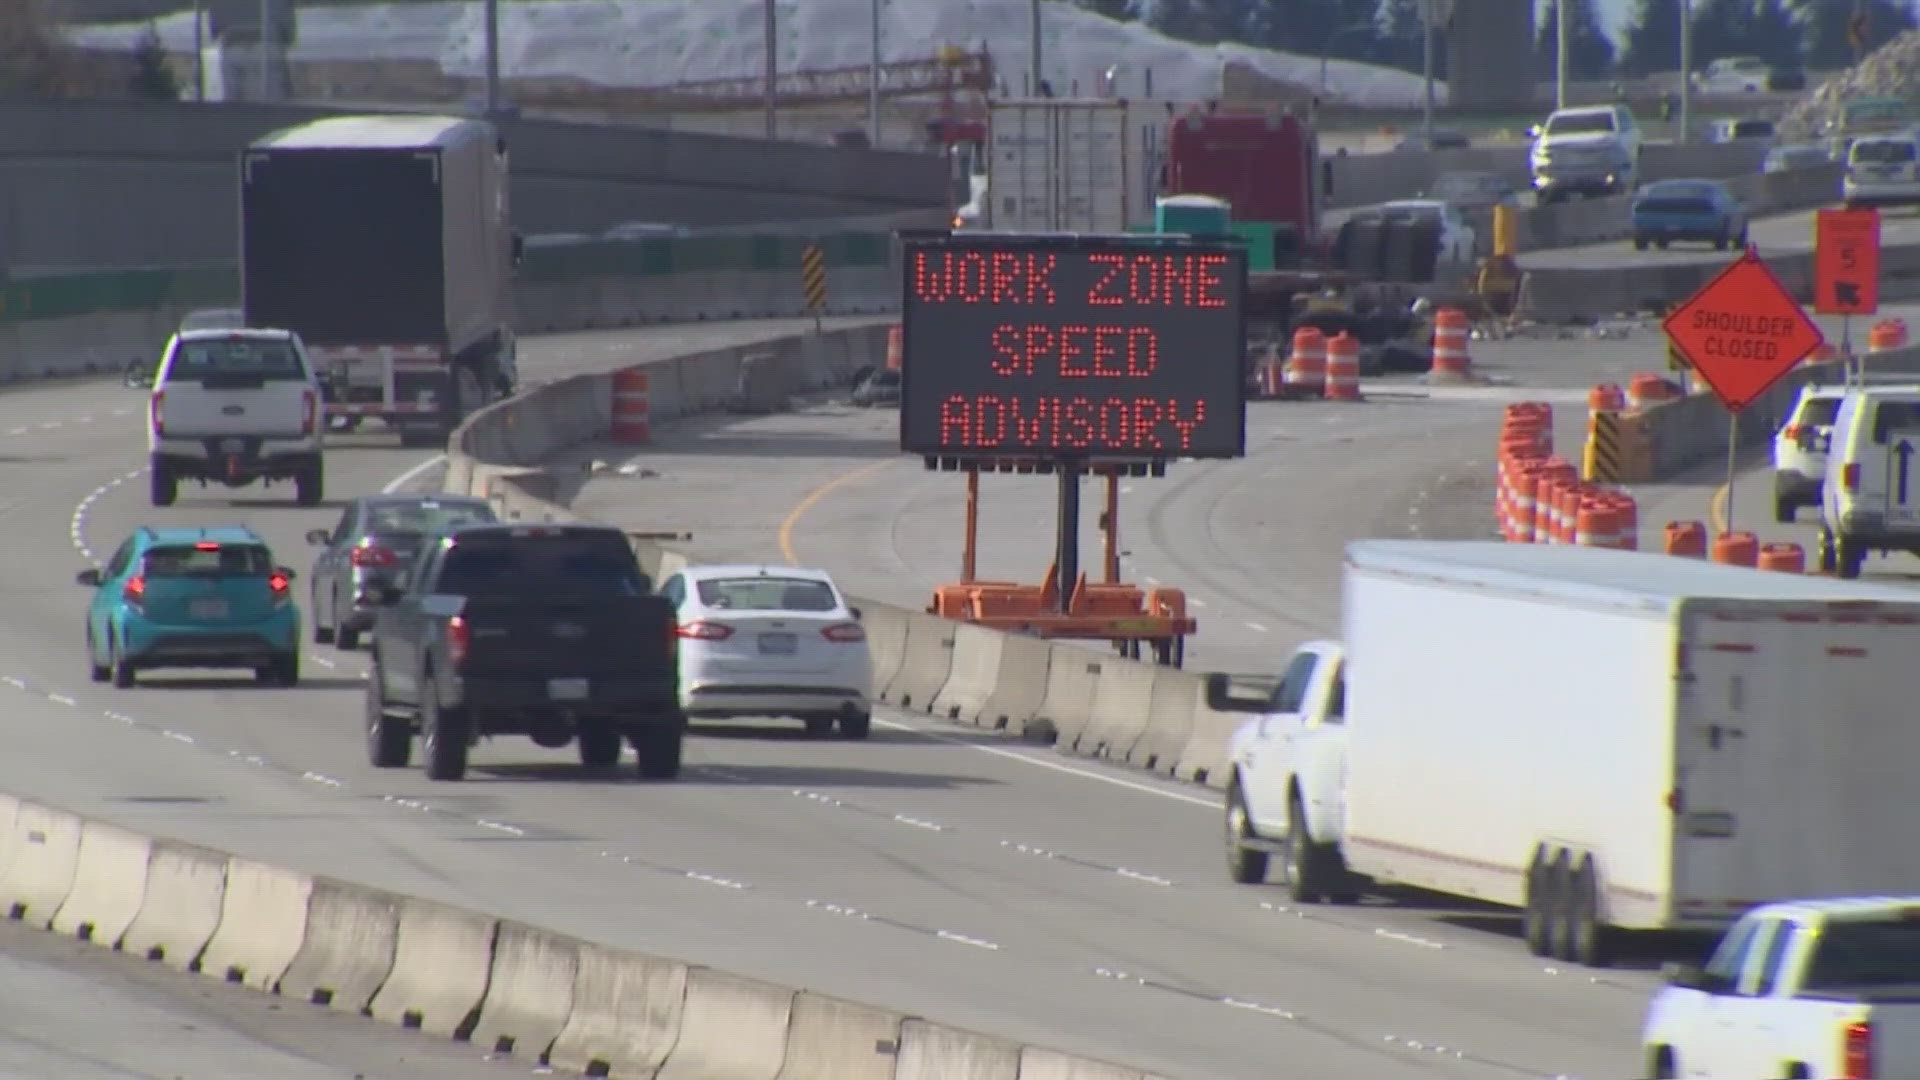 Since the beginning of the year, at least nine WSDOT workers have hospitalized after drivers crashed into work zones.